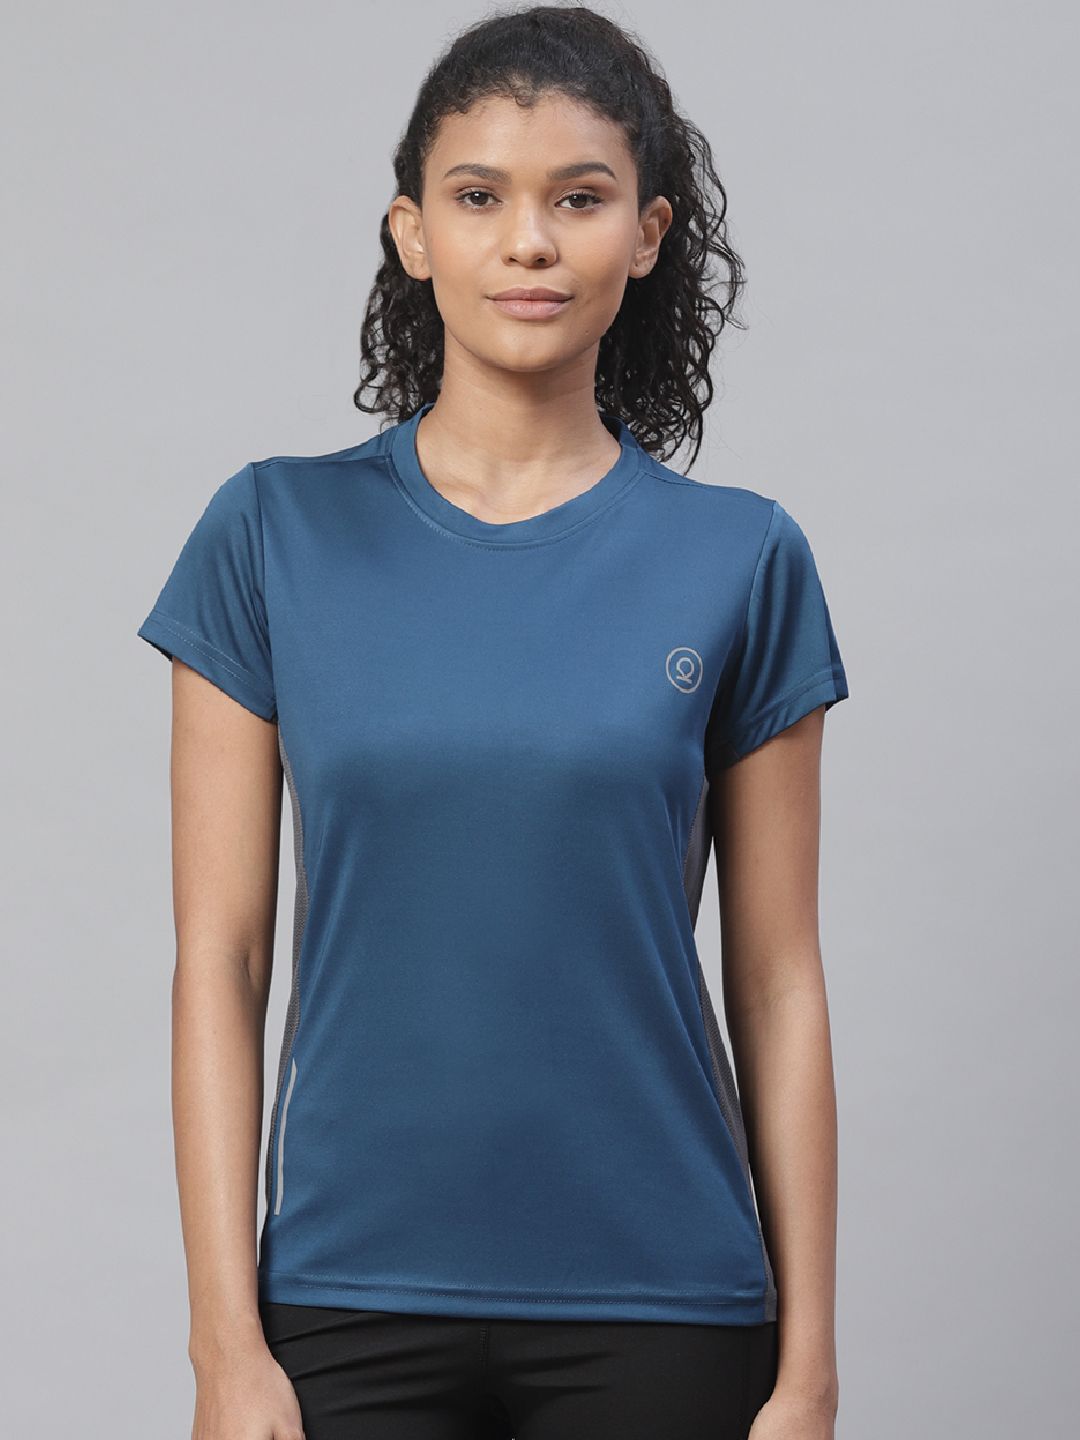 Chkokko Women Teal Blue Solid Round Neck Yoga T-shirt Price in India